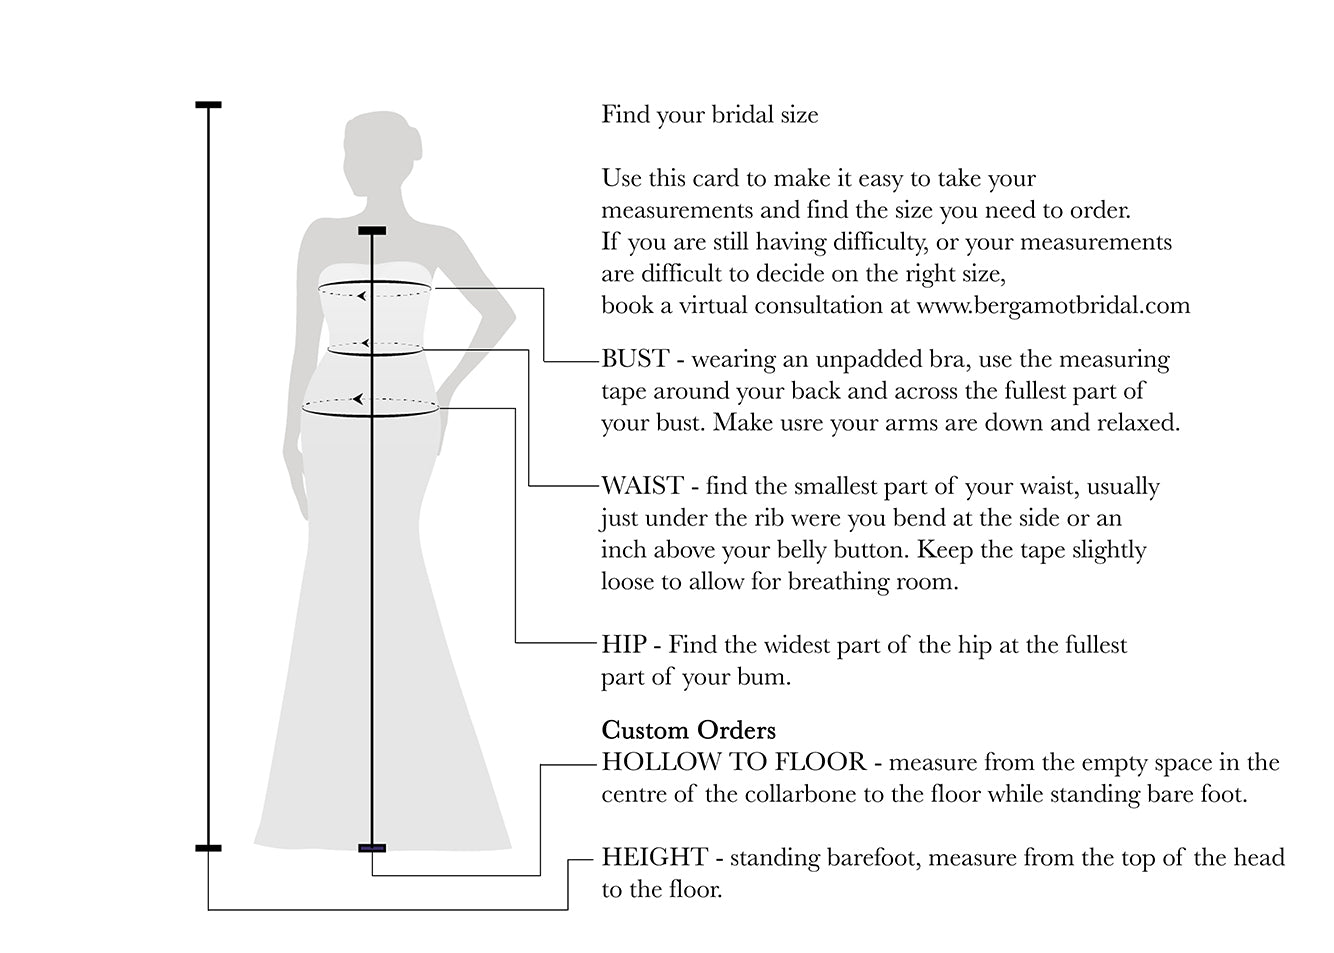 A diagram showing the measurements of the Margo - Chiffon Bridesmaid Dress - Off the Rack in Bergamot Bridal shop.